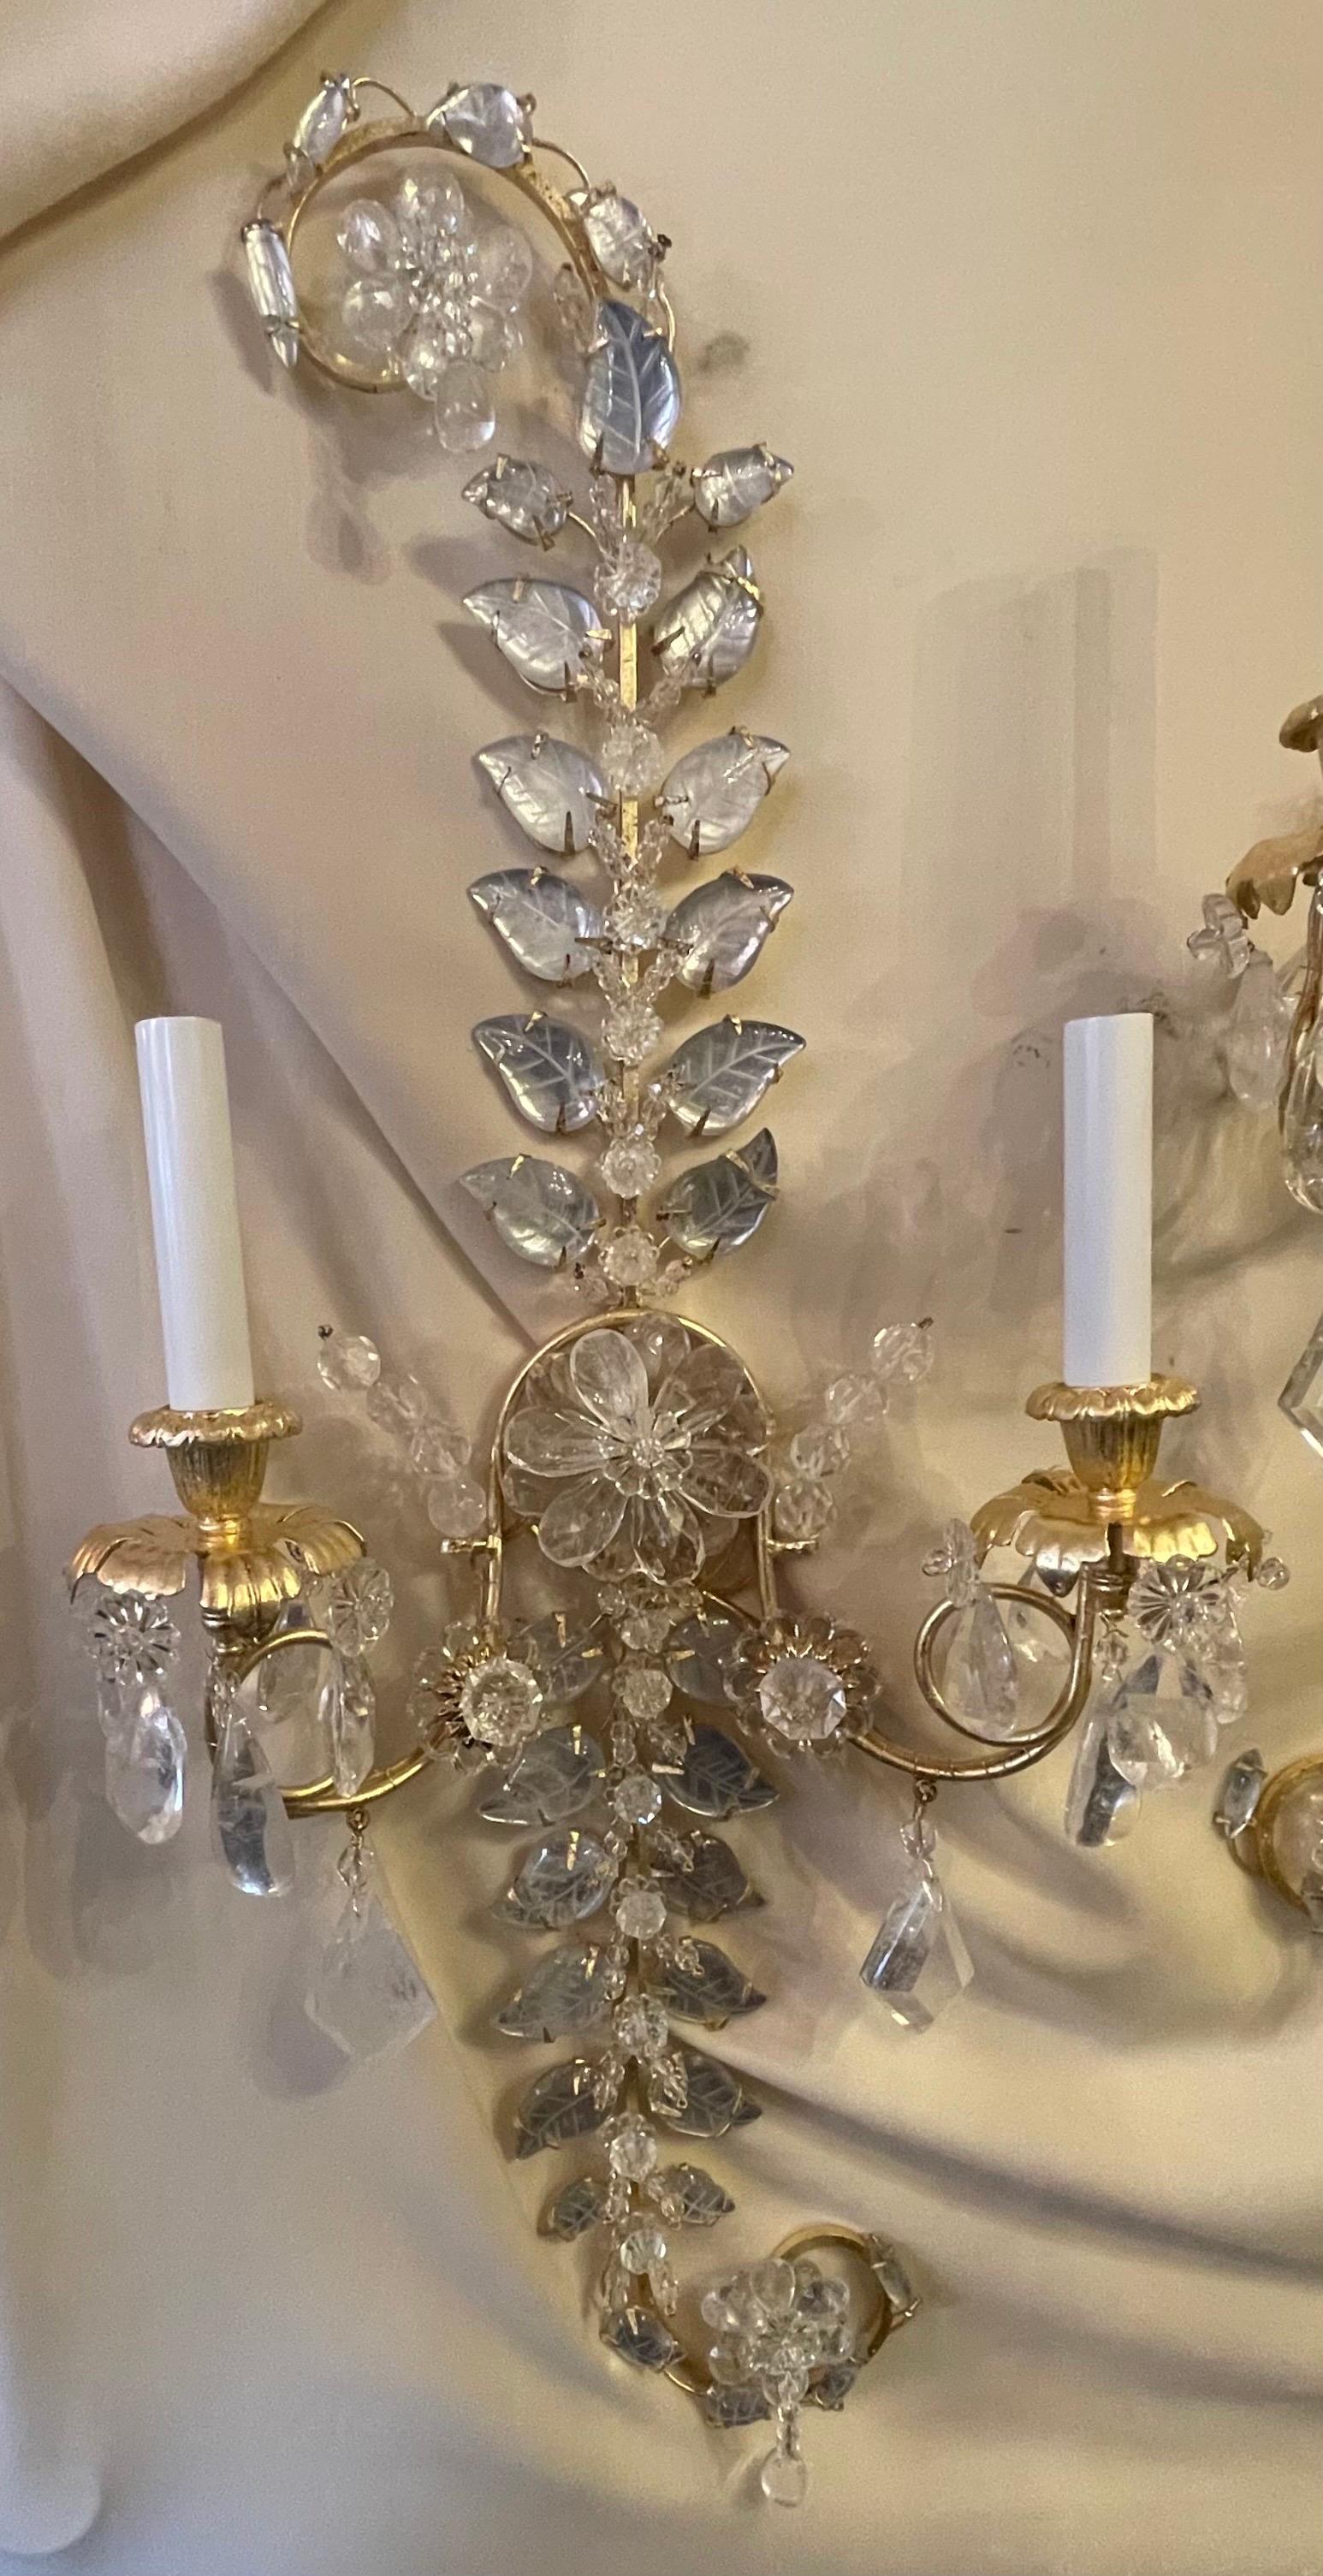 A wonderful large pair of French Maison Baguès style gold leaf gilt and rock crystal leaf paisley form two arm sconces each rewired with new candelabra sockets.

